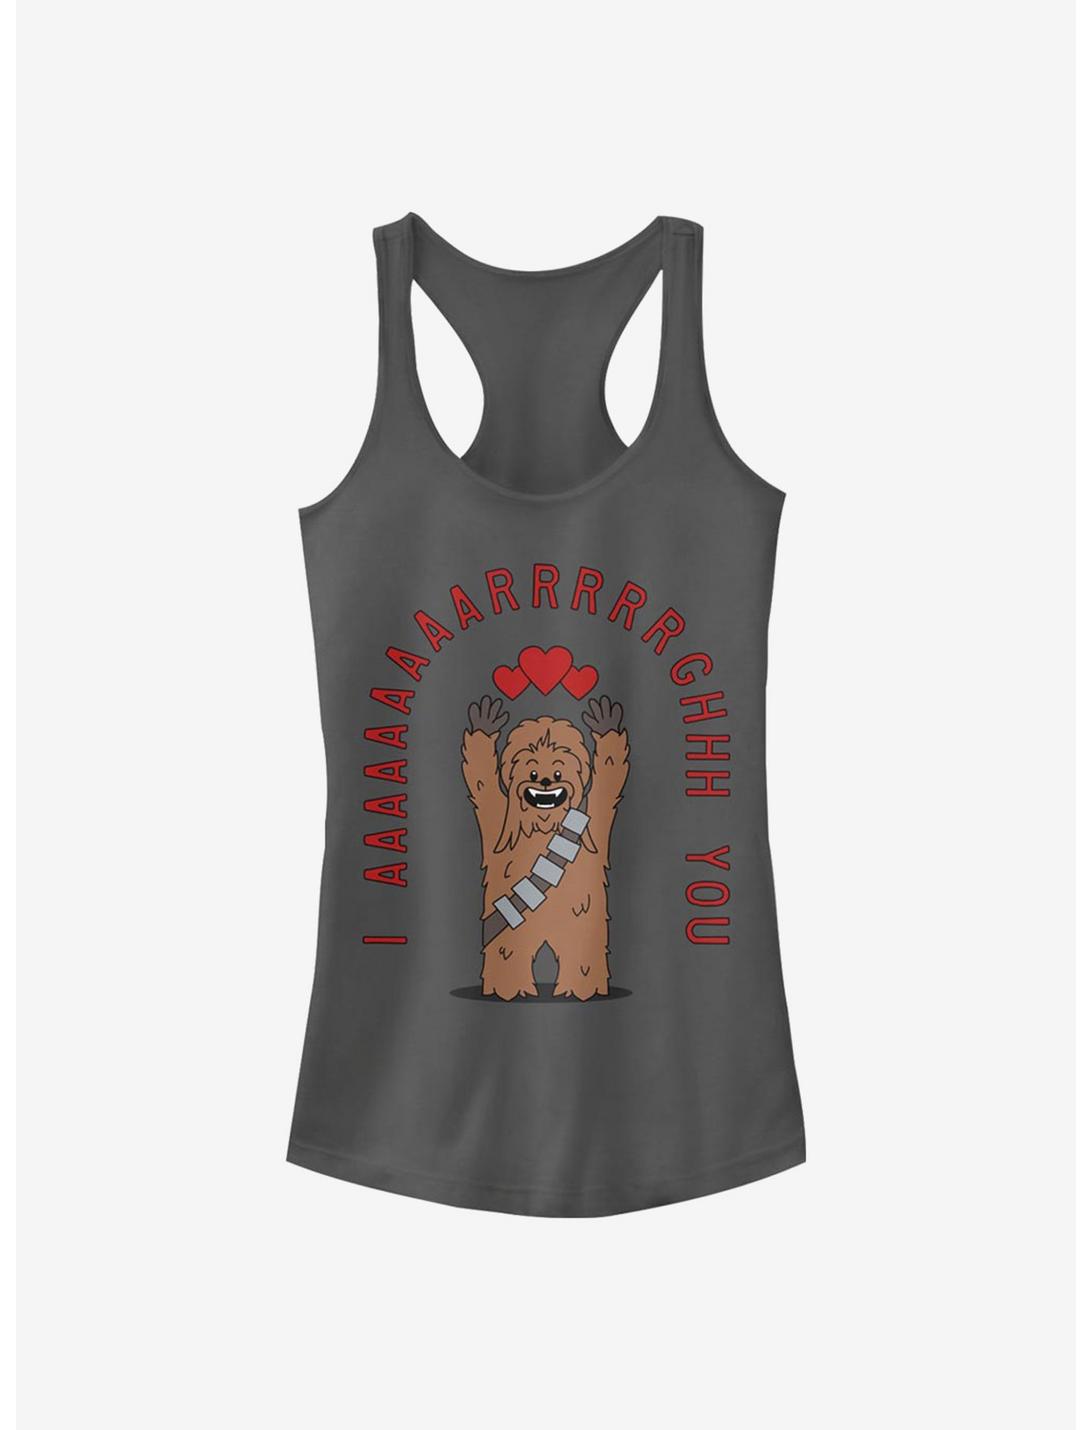 Star Wars Chewie Arrgghs You Girls Tank, CHARCOAL, hi-res